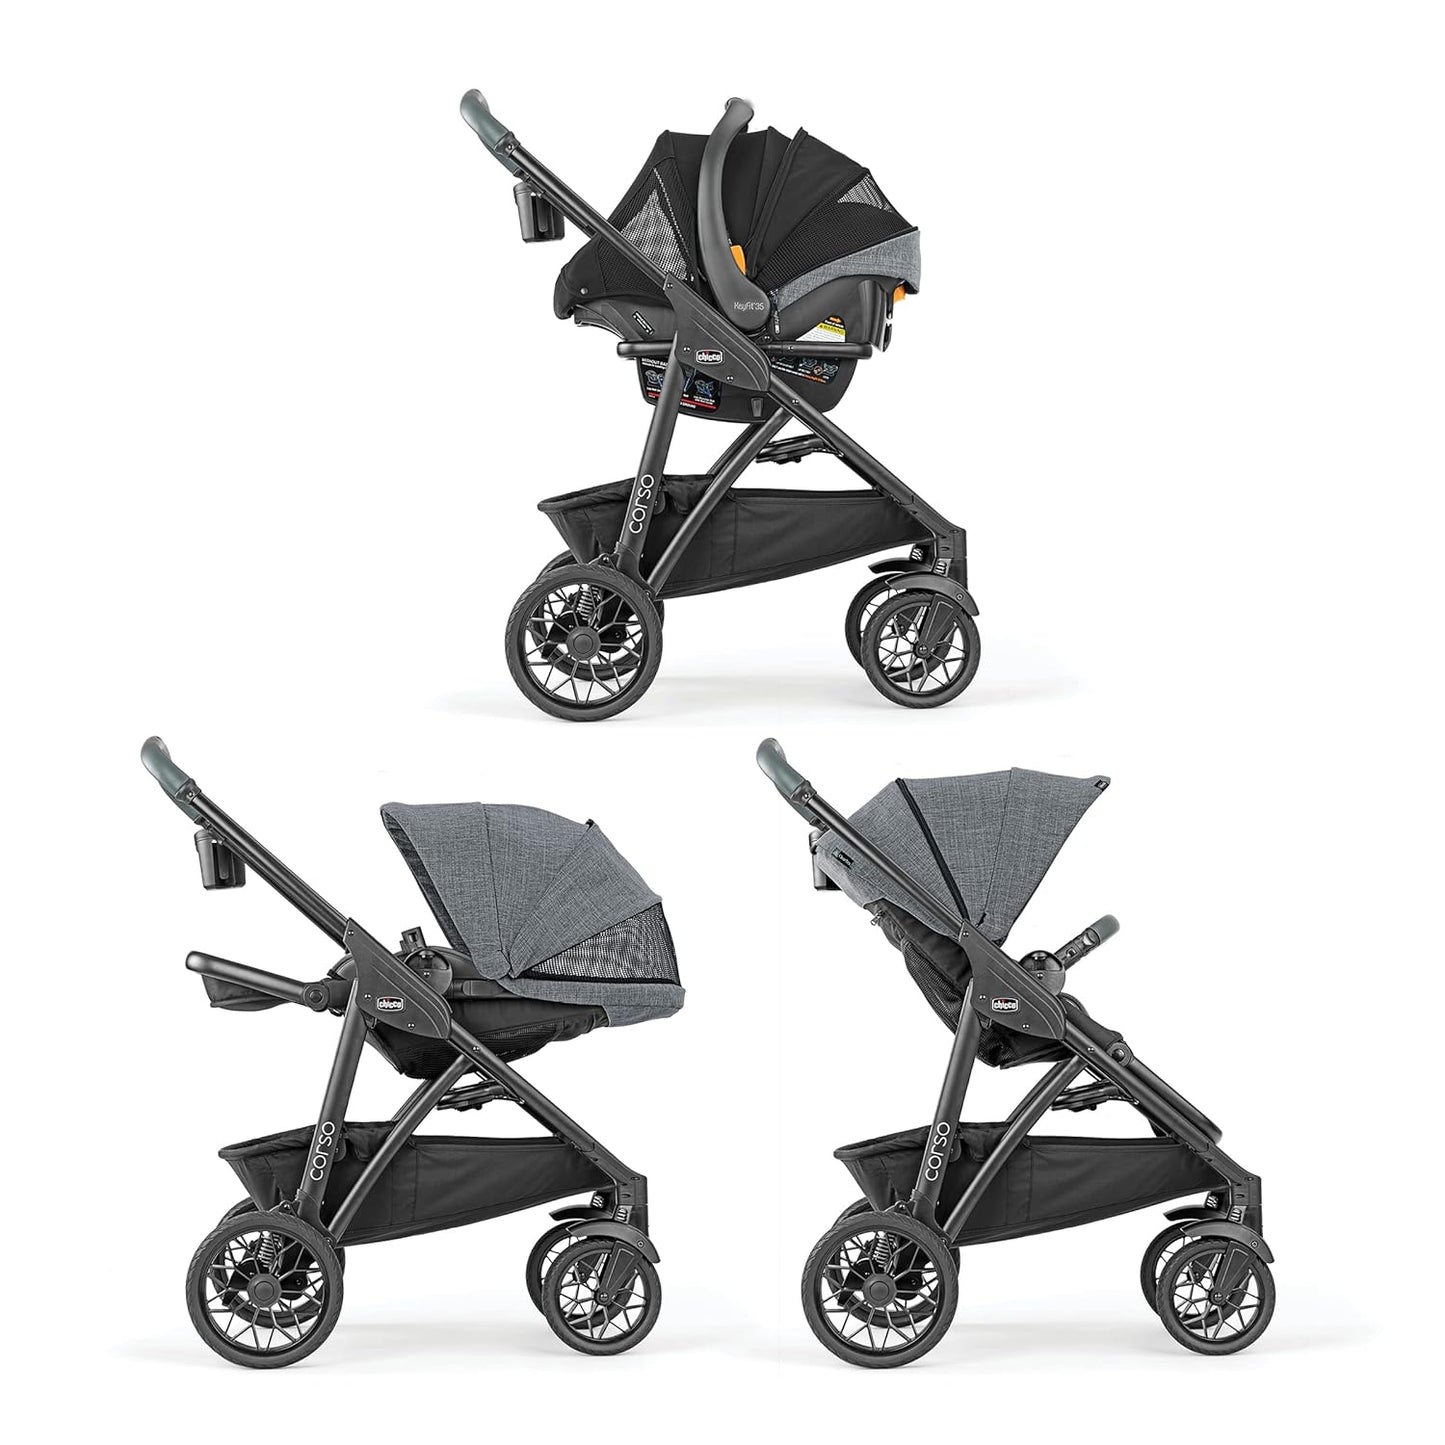 Chicco Modular Travel System - Corso LE Stroller, KeyFit 35 Infant Car Seat and Base - Stroller and Car Seat Combo in Veranda/Grey